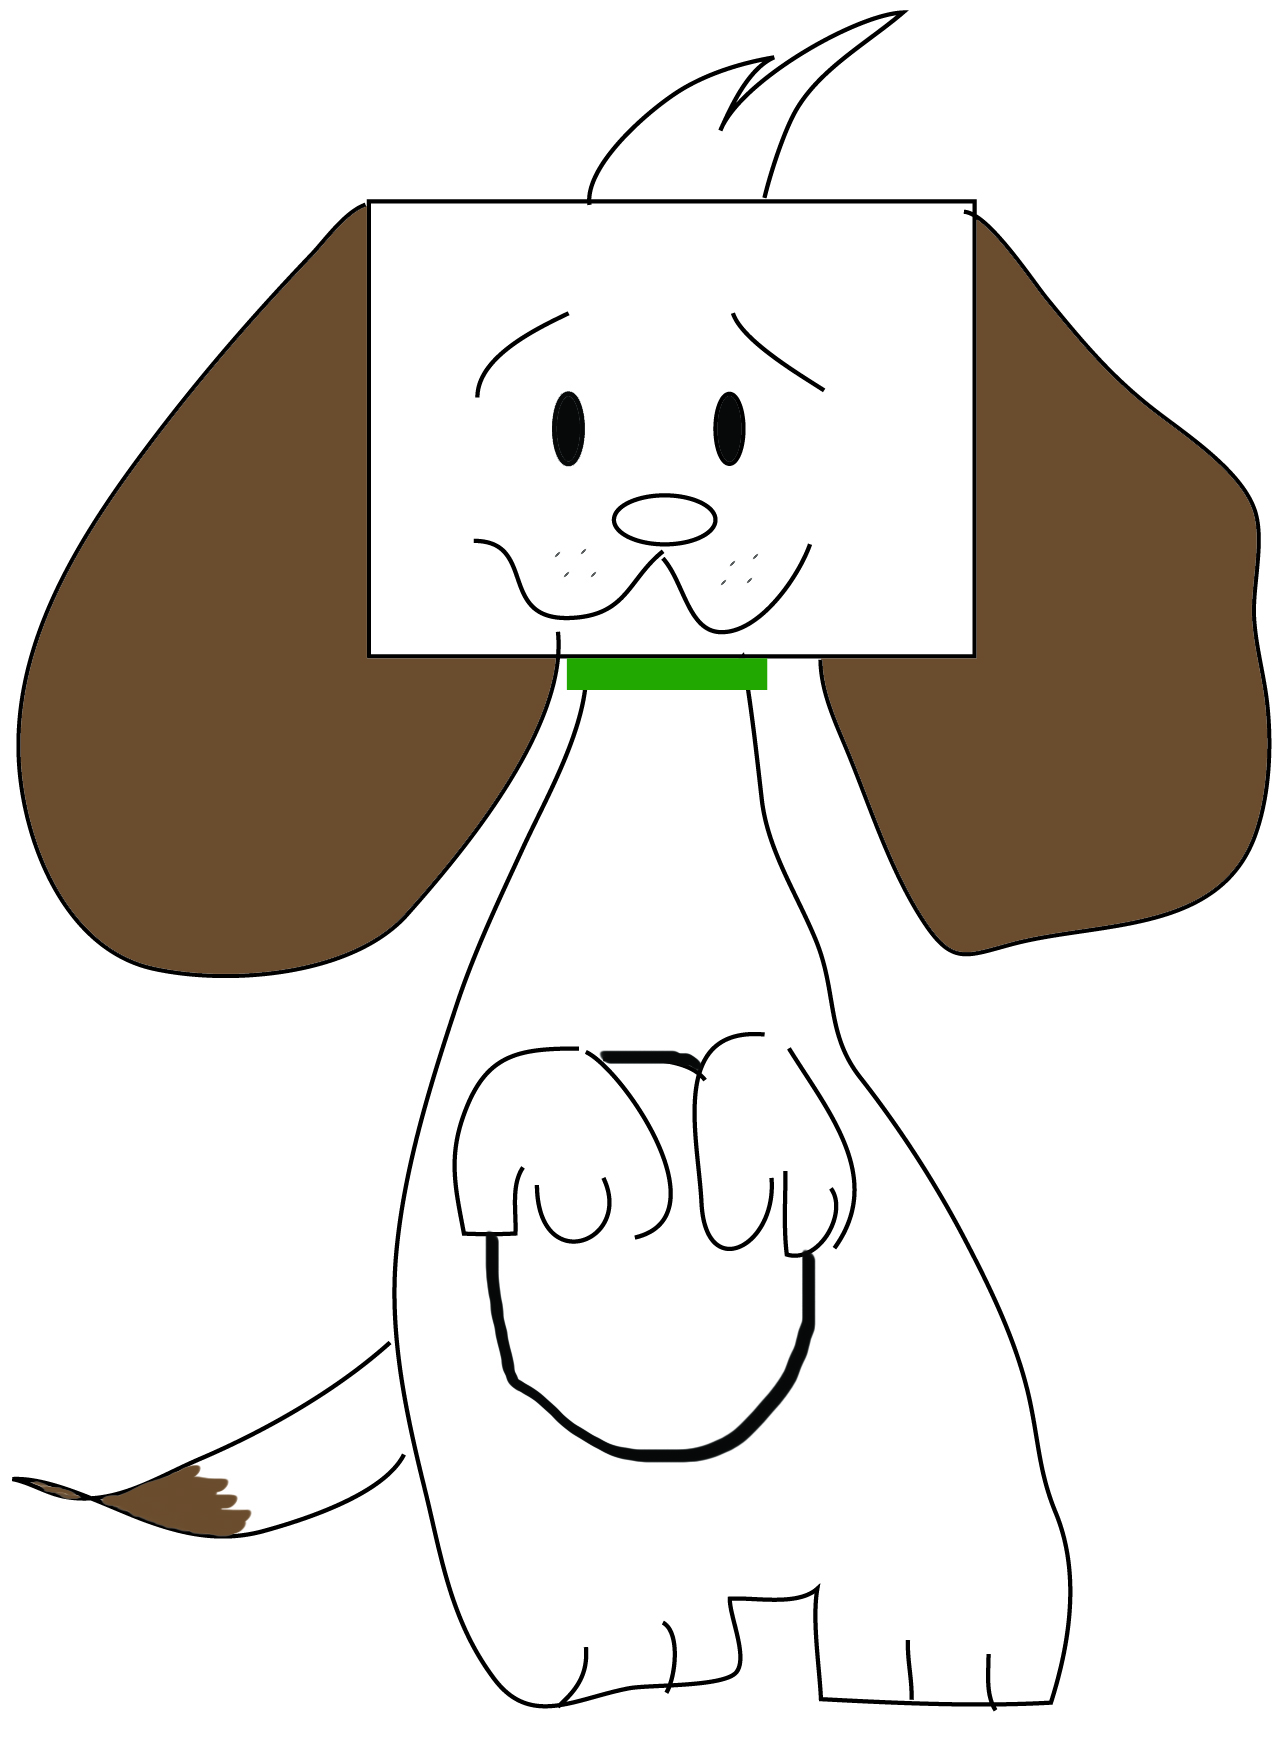 Sketches Of Dogs - ClipArt Best